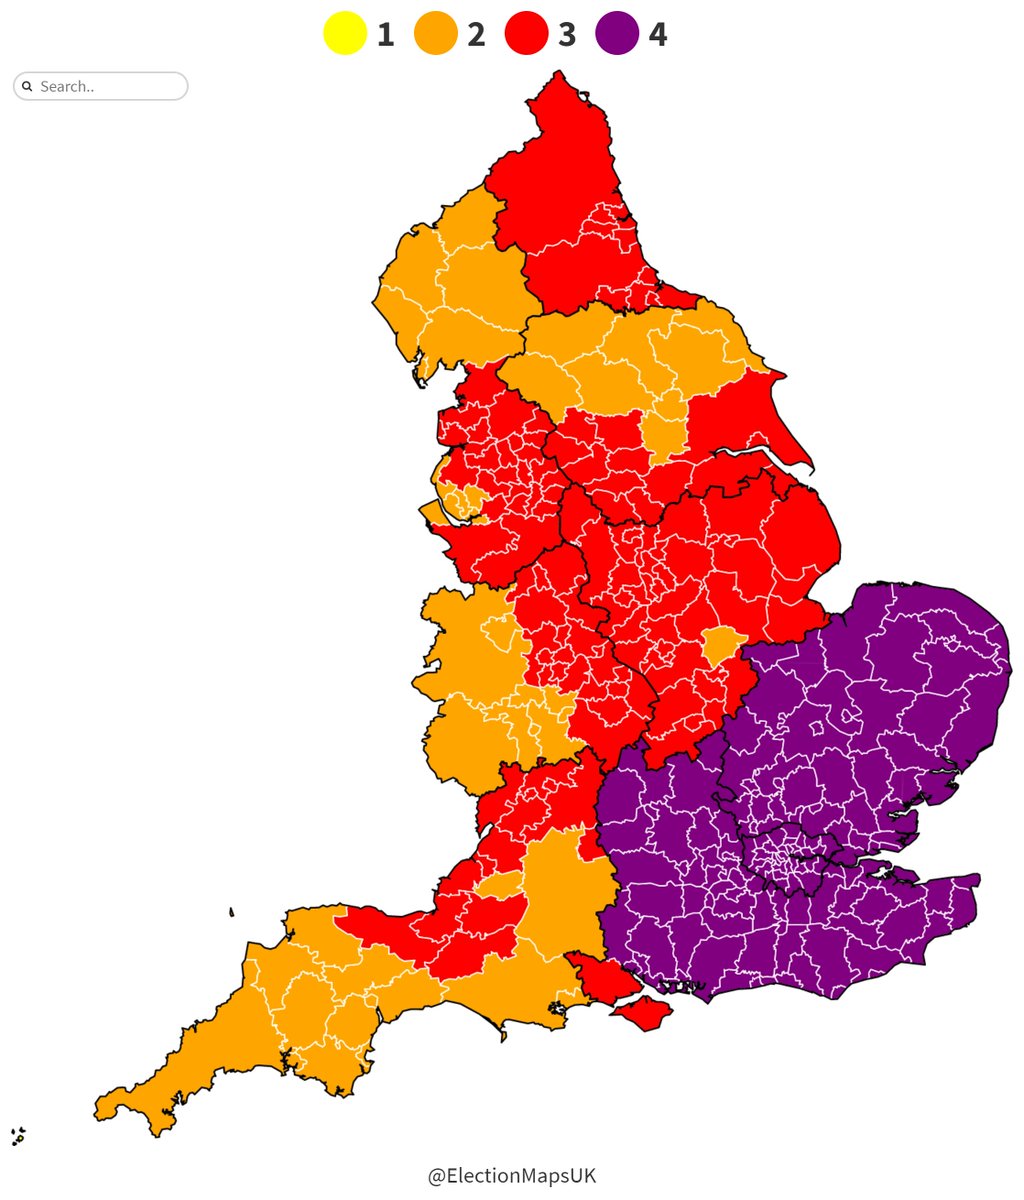 Then on December 23rd, the govt acted again- extending T4 to all of the south east of England. But swathes of the country were still in T2 and much more in T3.We know during this time the new variant was seeded elsewhere- but some of those areas still had lighter restrictions.